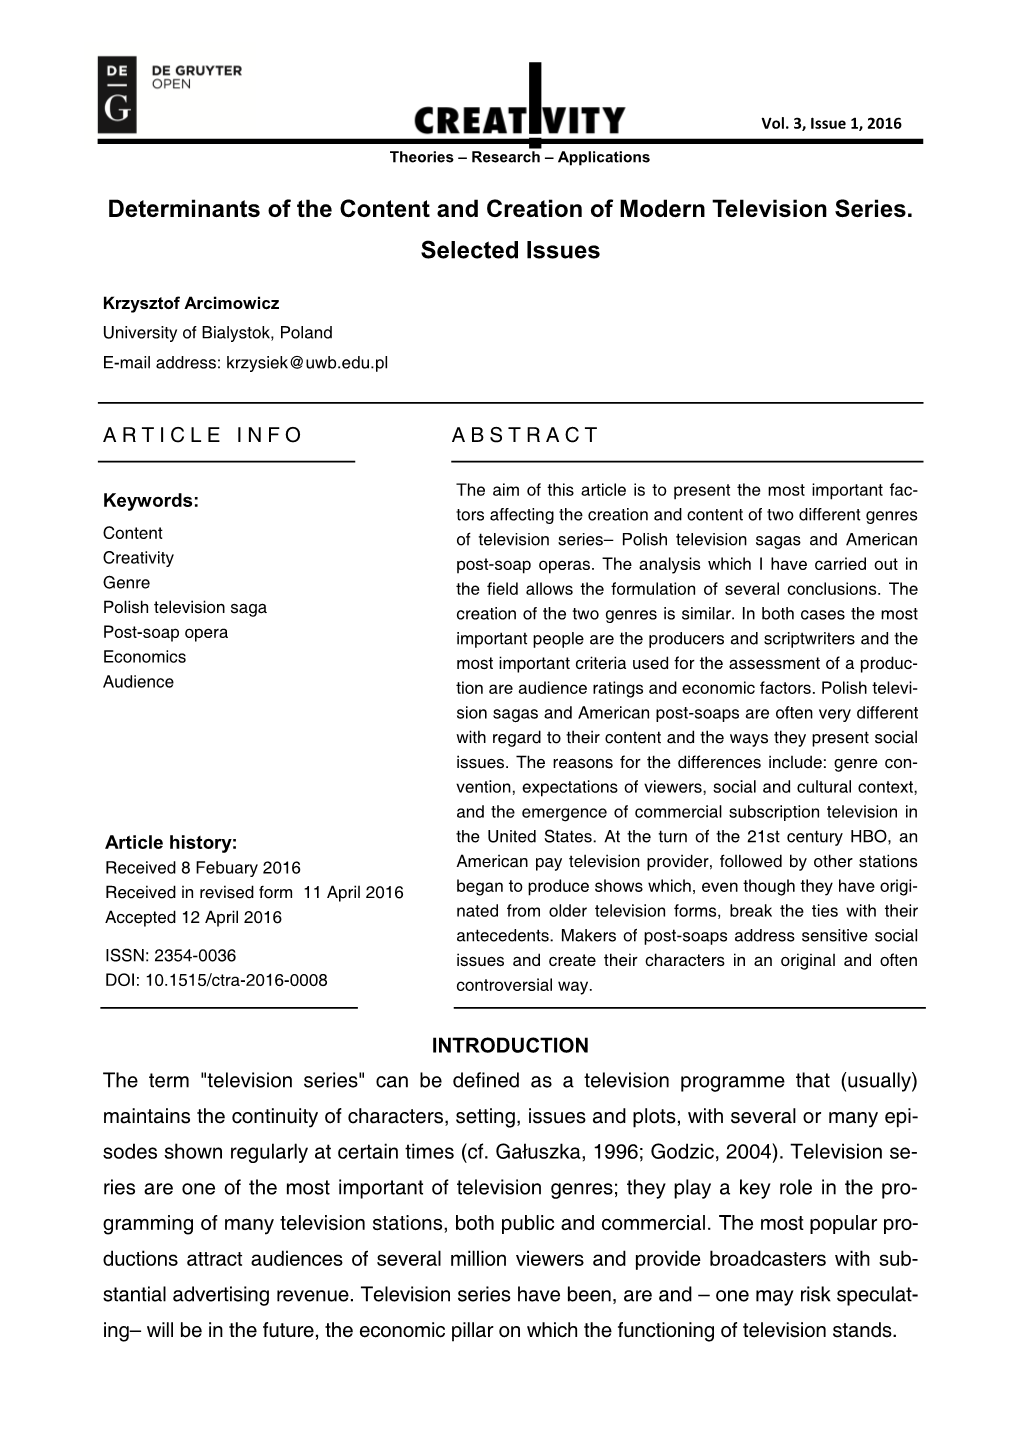 Determinants of the Content and Creation of Modern Television Series